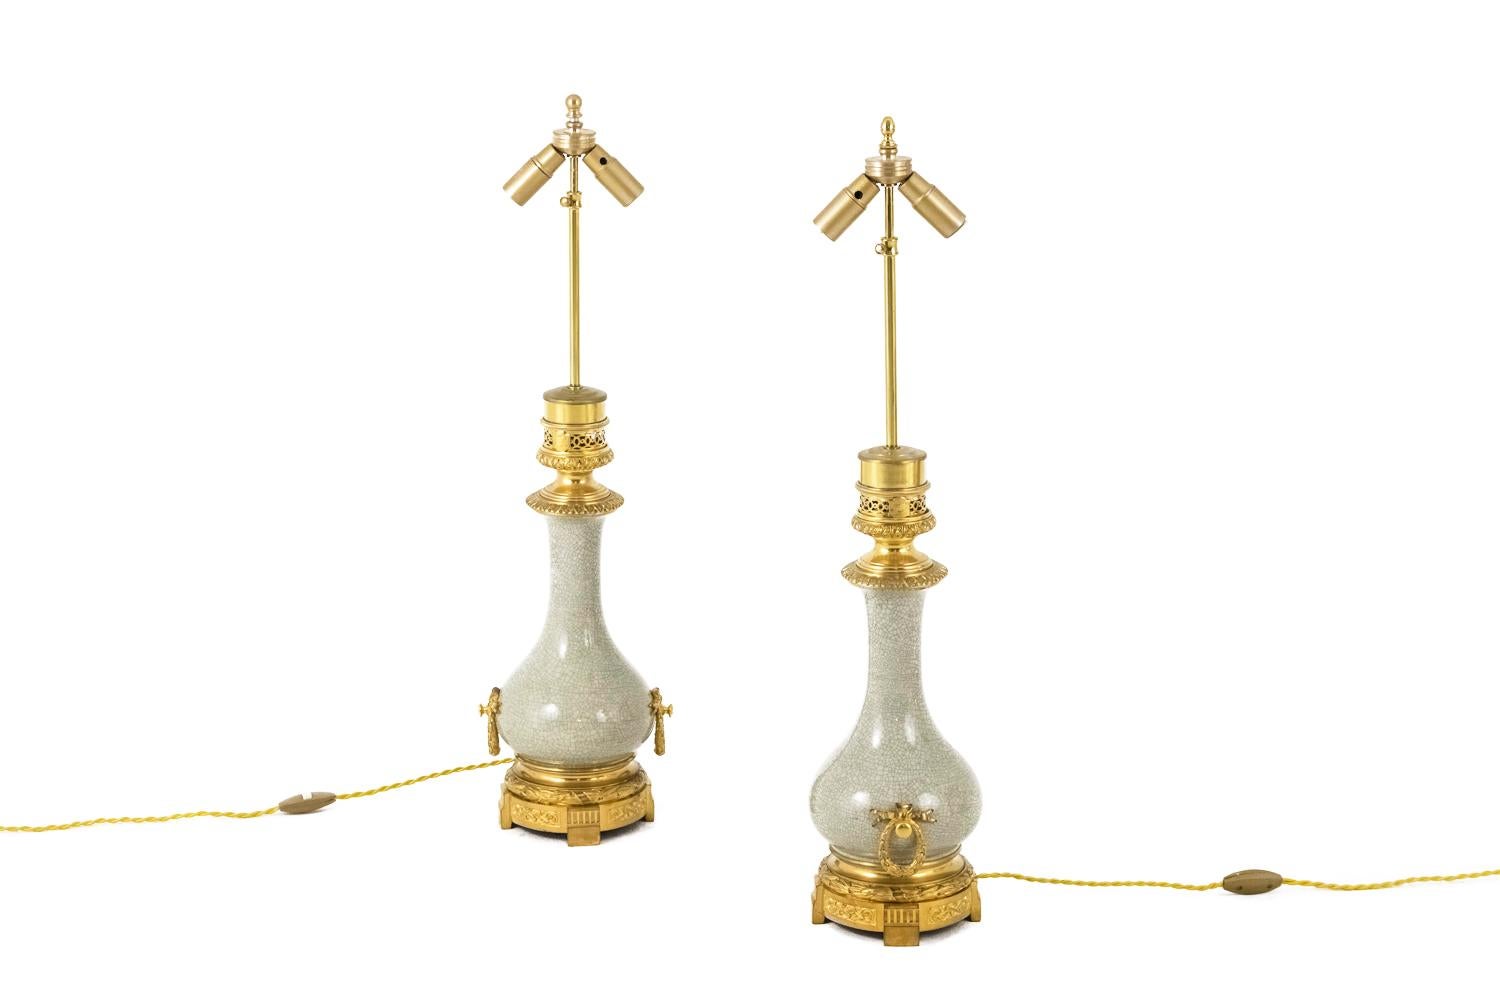 Pair of bottle shape Louis XVI style lamps in cracked beige celadon porcelain.
Chiselled and gilt bronze mount. High part with a decor of leaves friezes, twisted ring and geometrical openwork motifs. Decor of laurel wreath fixed by a ribbon forming